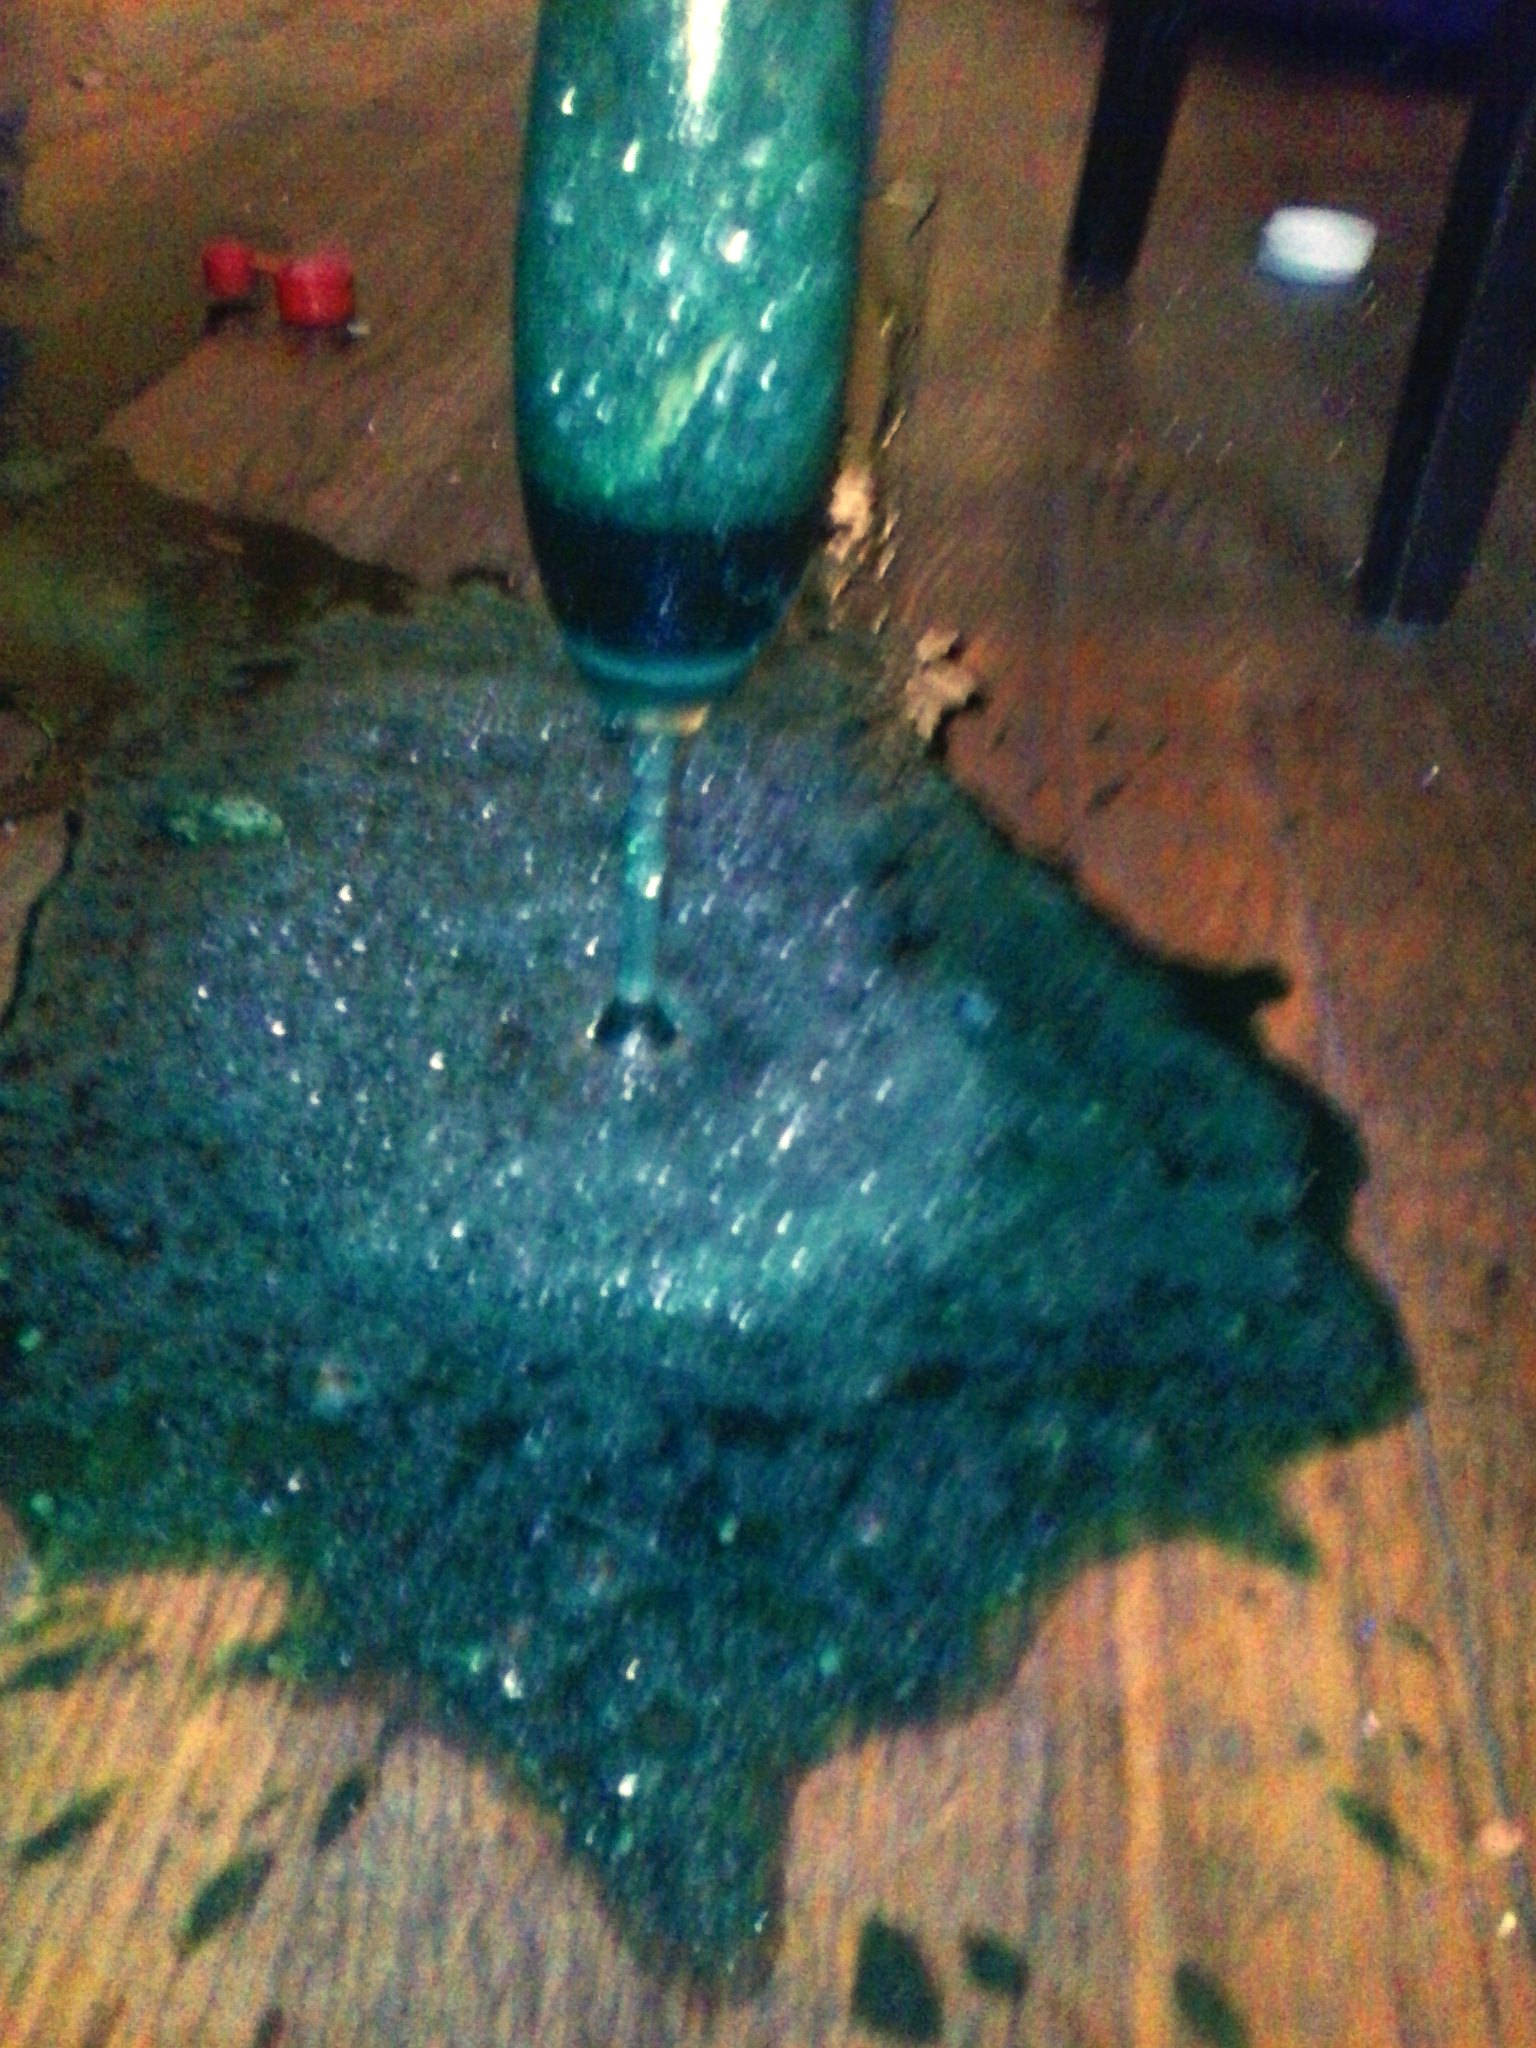 the vase is sitting on the ground, leaking liquid